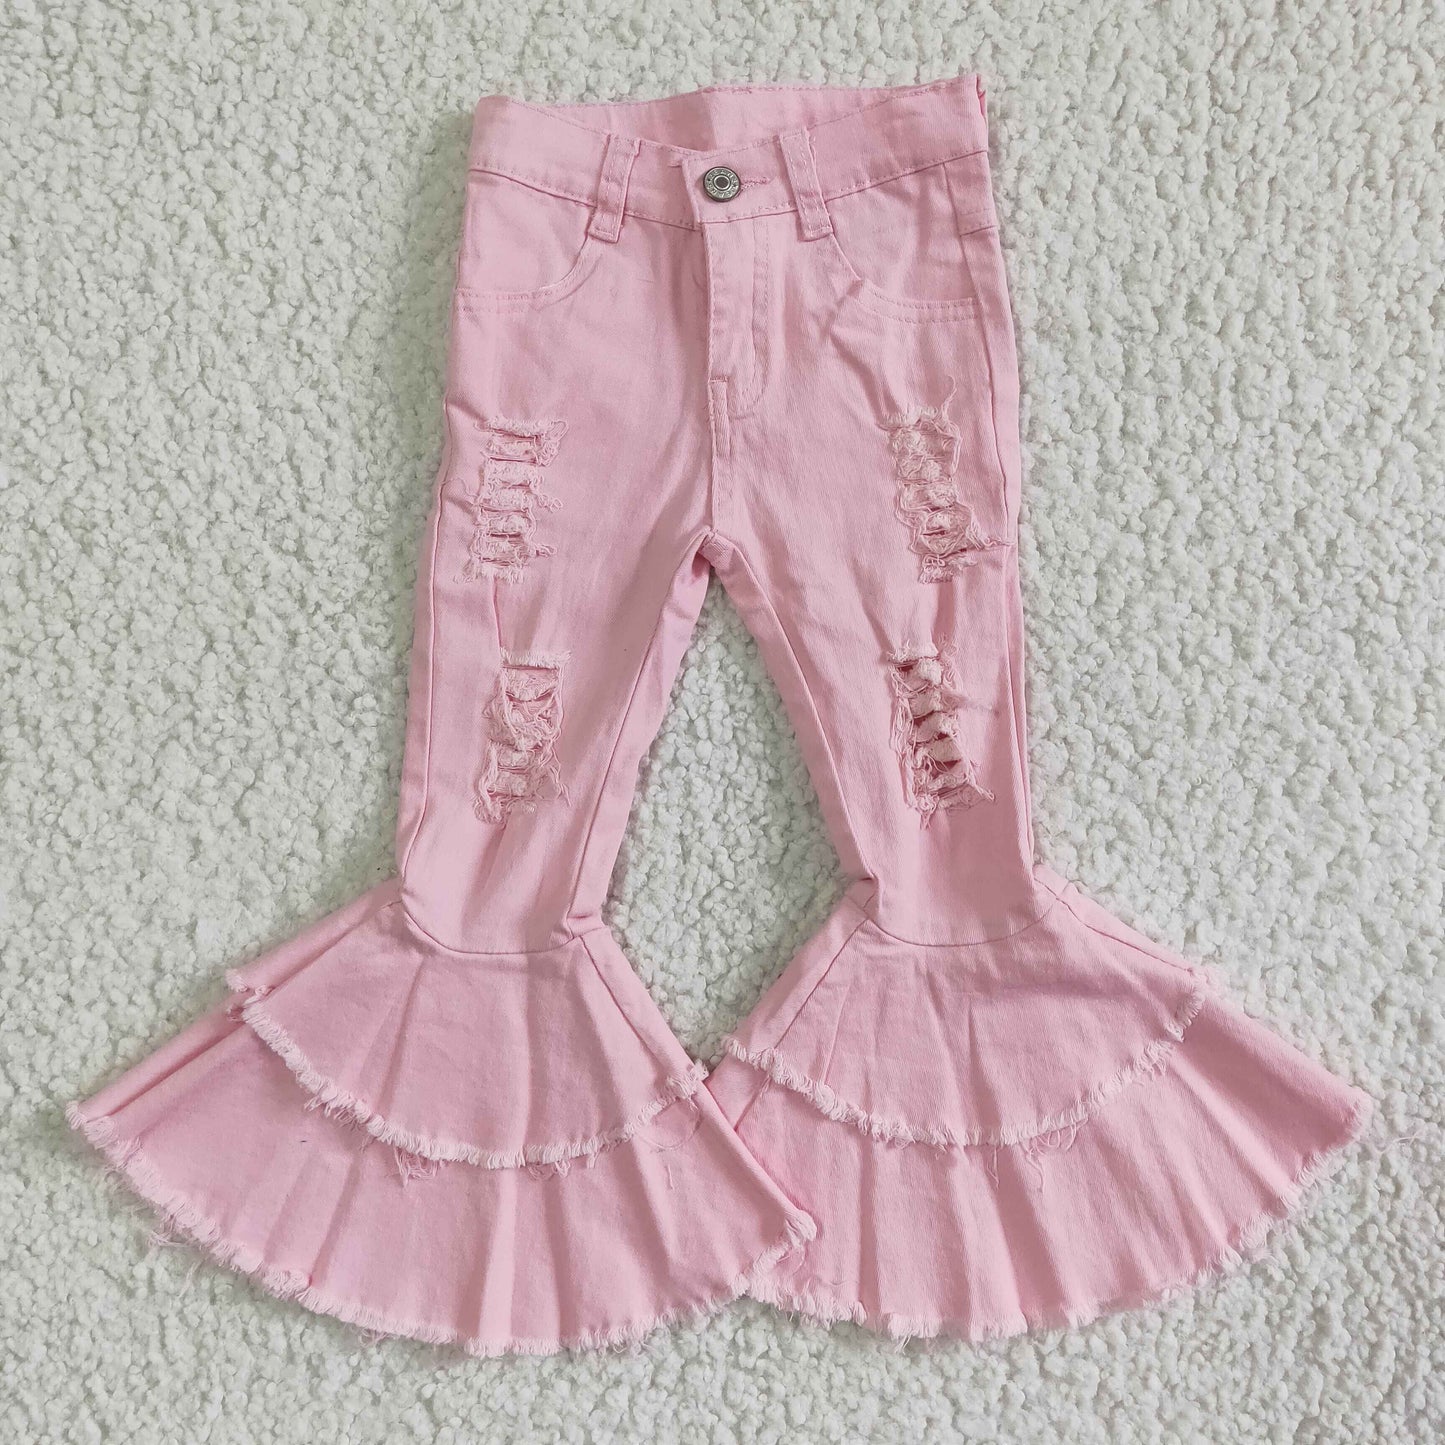 P0005 pink ripped denim trousers